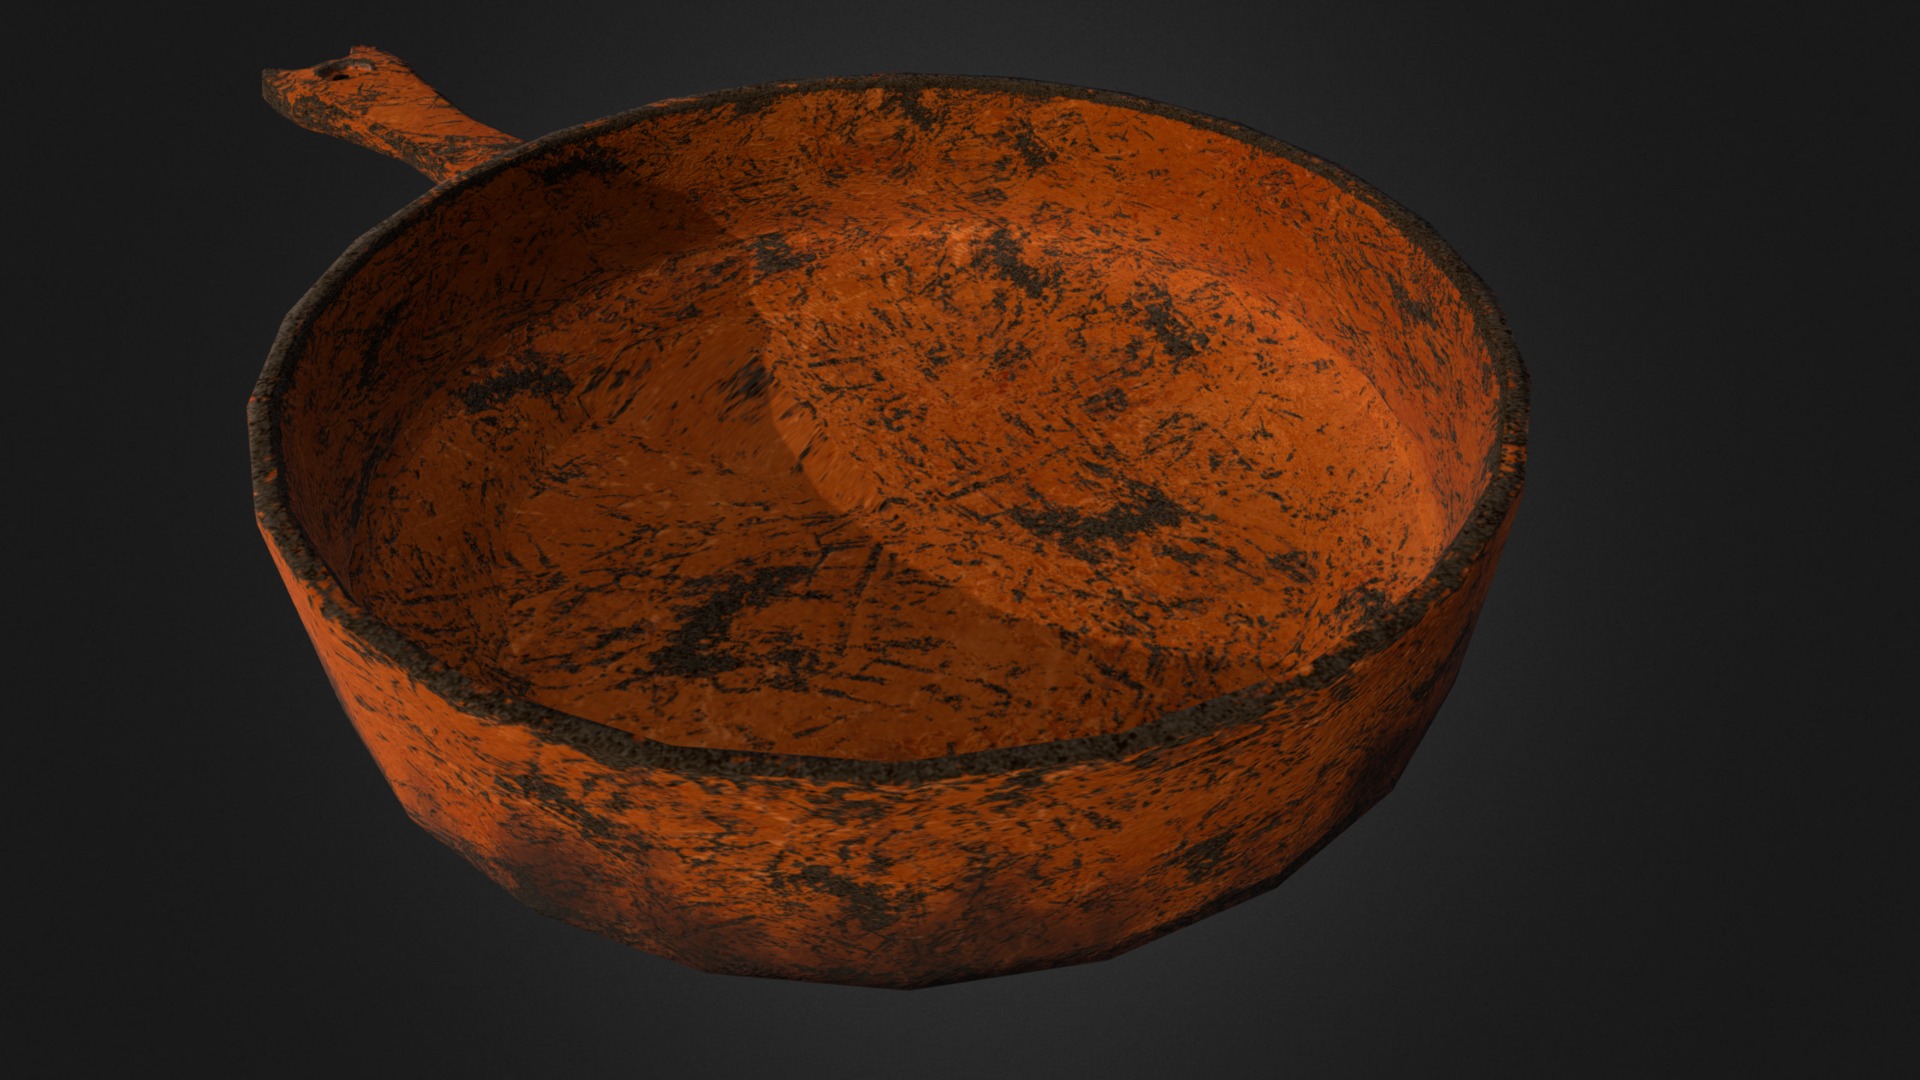 3D model Old Mexican Clay Pottery Pan Pot - This is a 3D model of the Old Mexican Clay Pottery Pan Pot. The 3D model is about a round orange fruit.